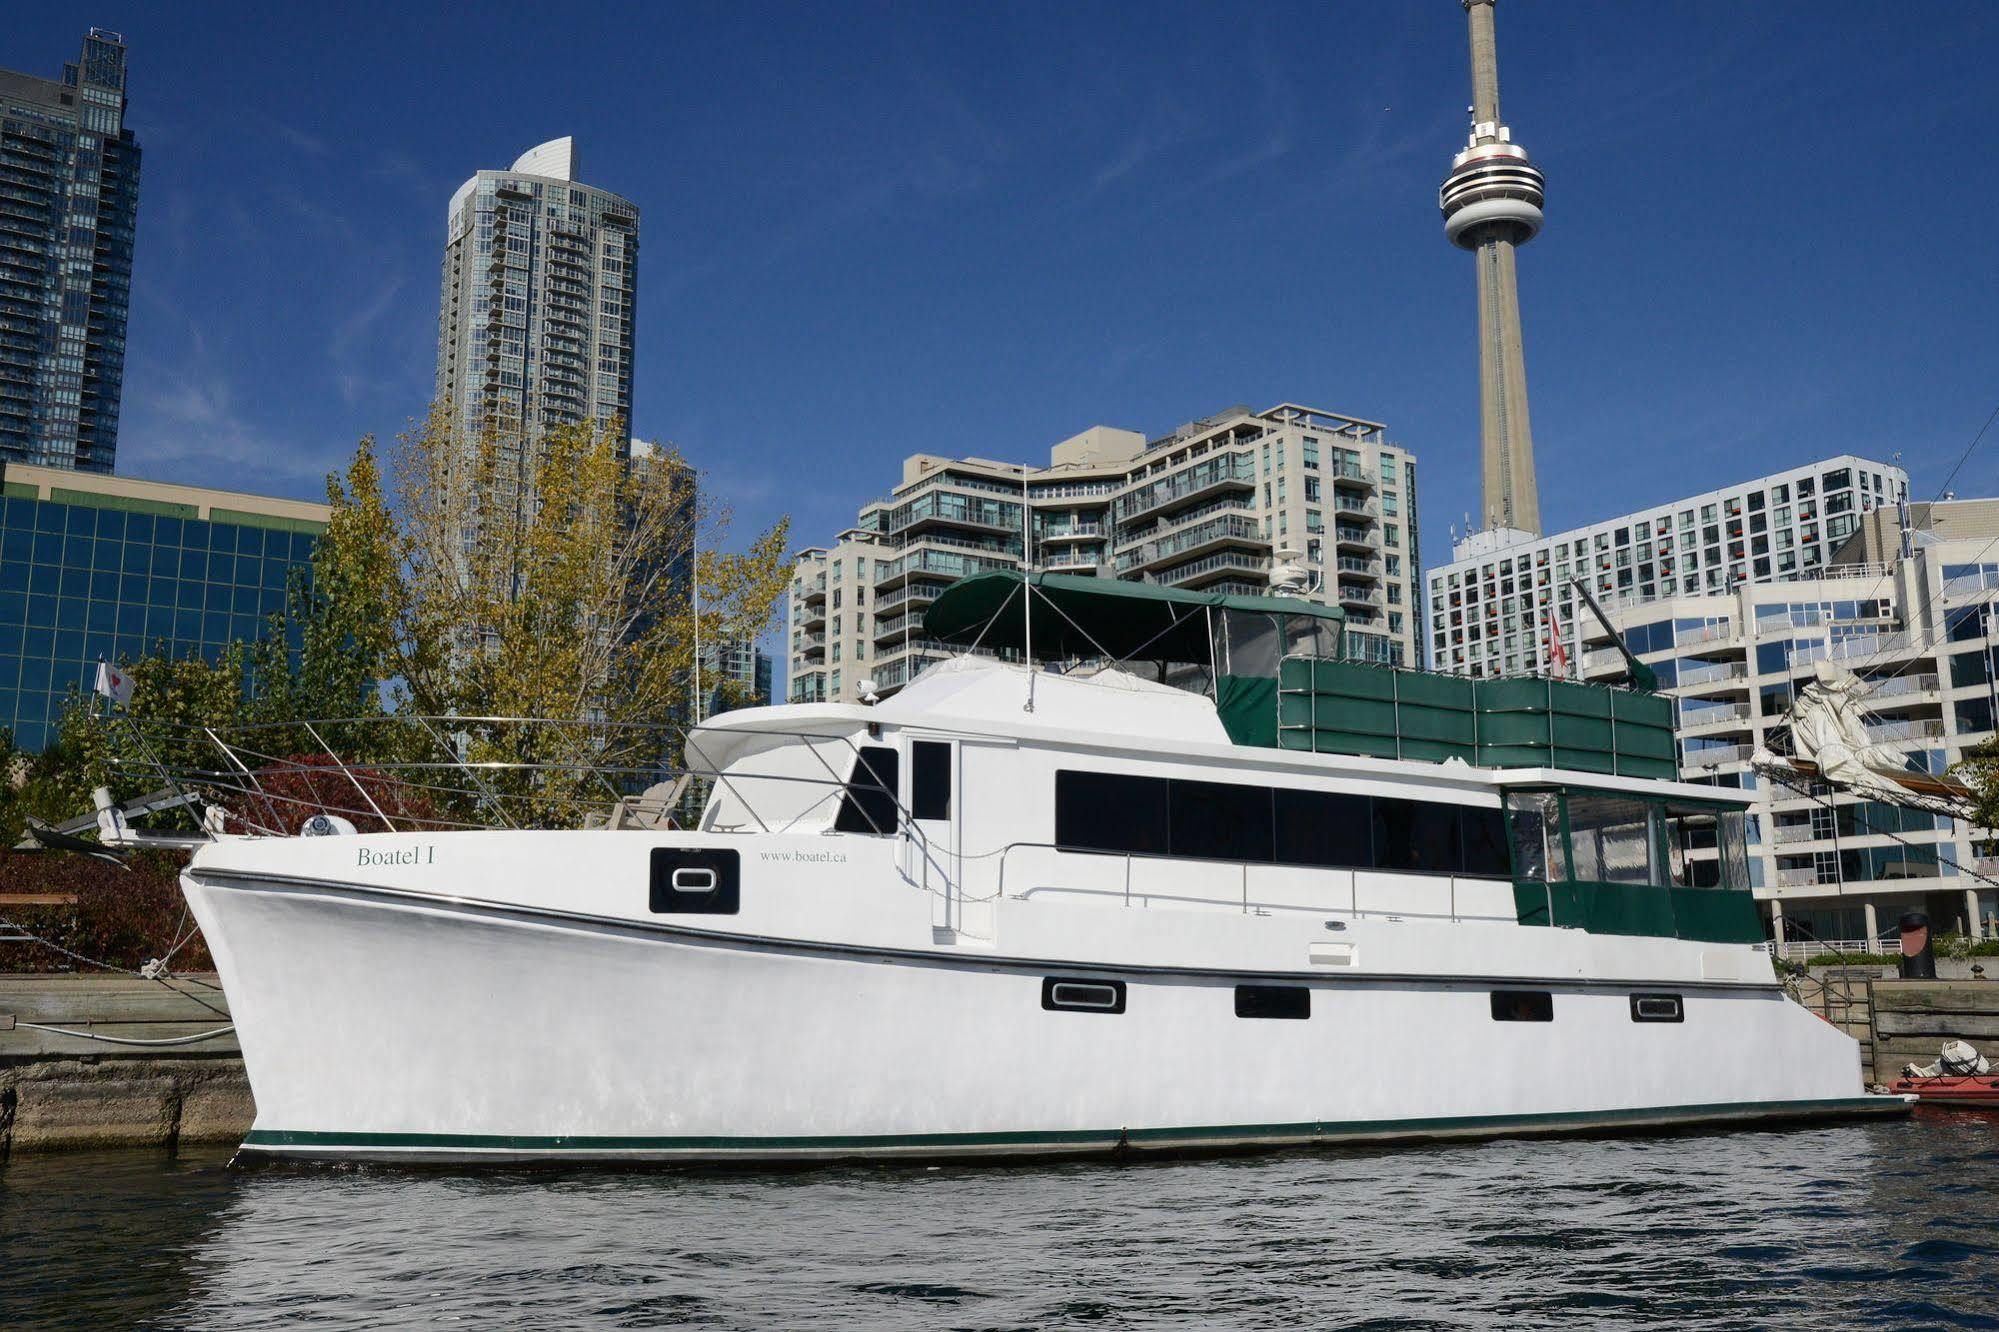 Bed and Breakfast Making Waves Boatel Toronto Exterior foto